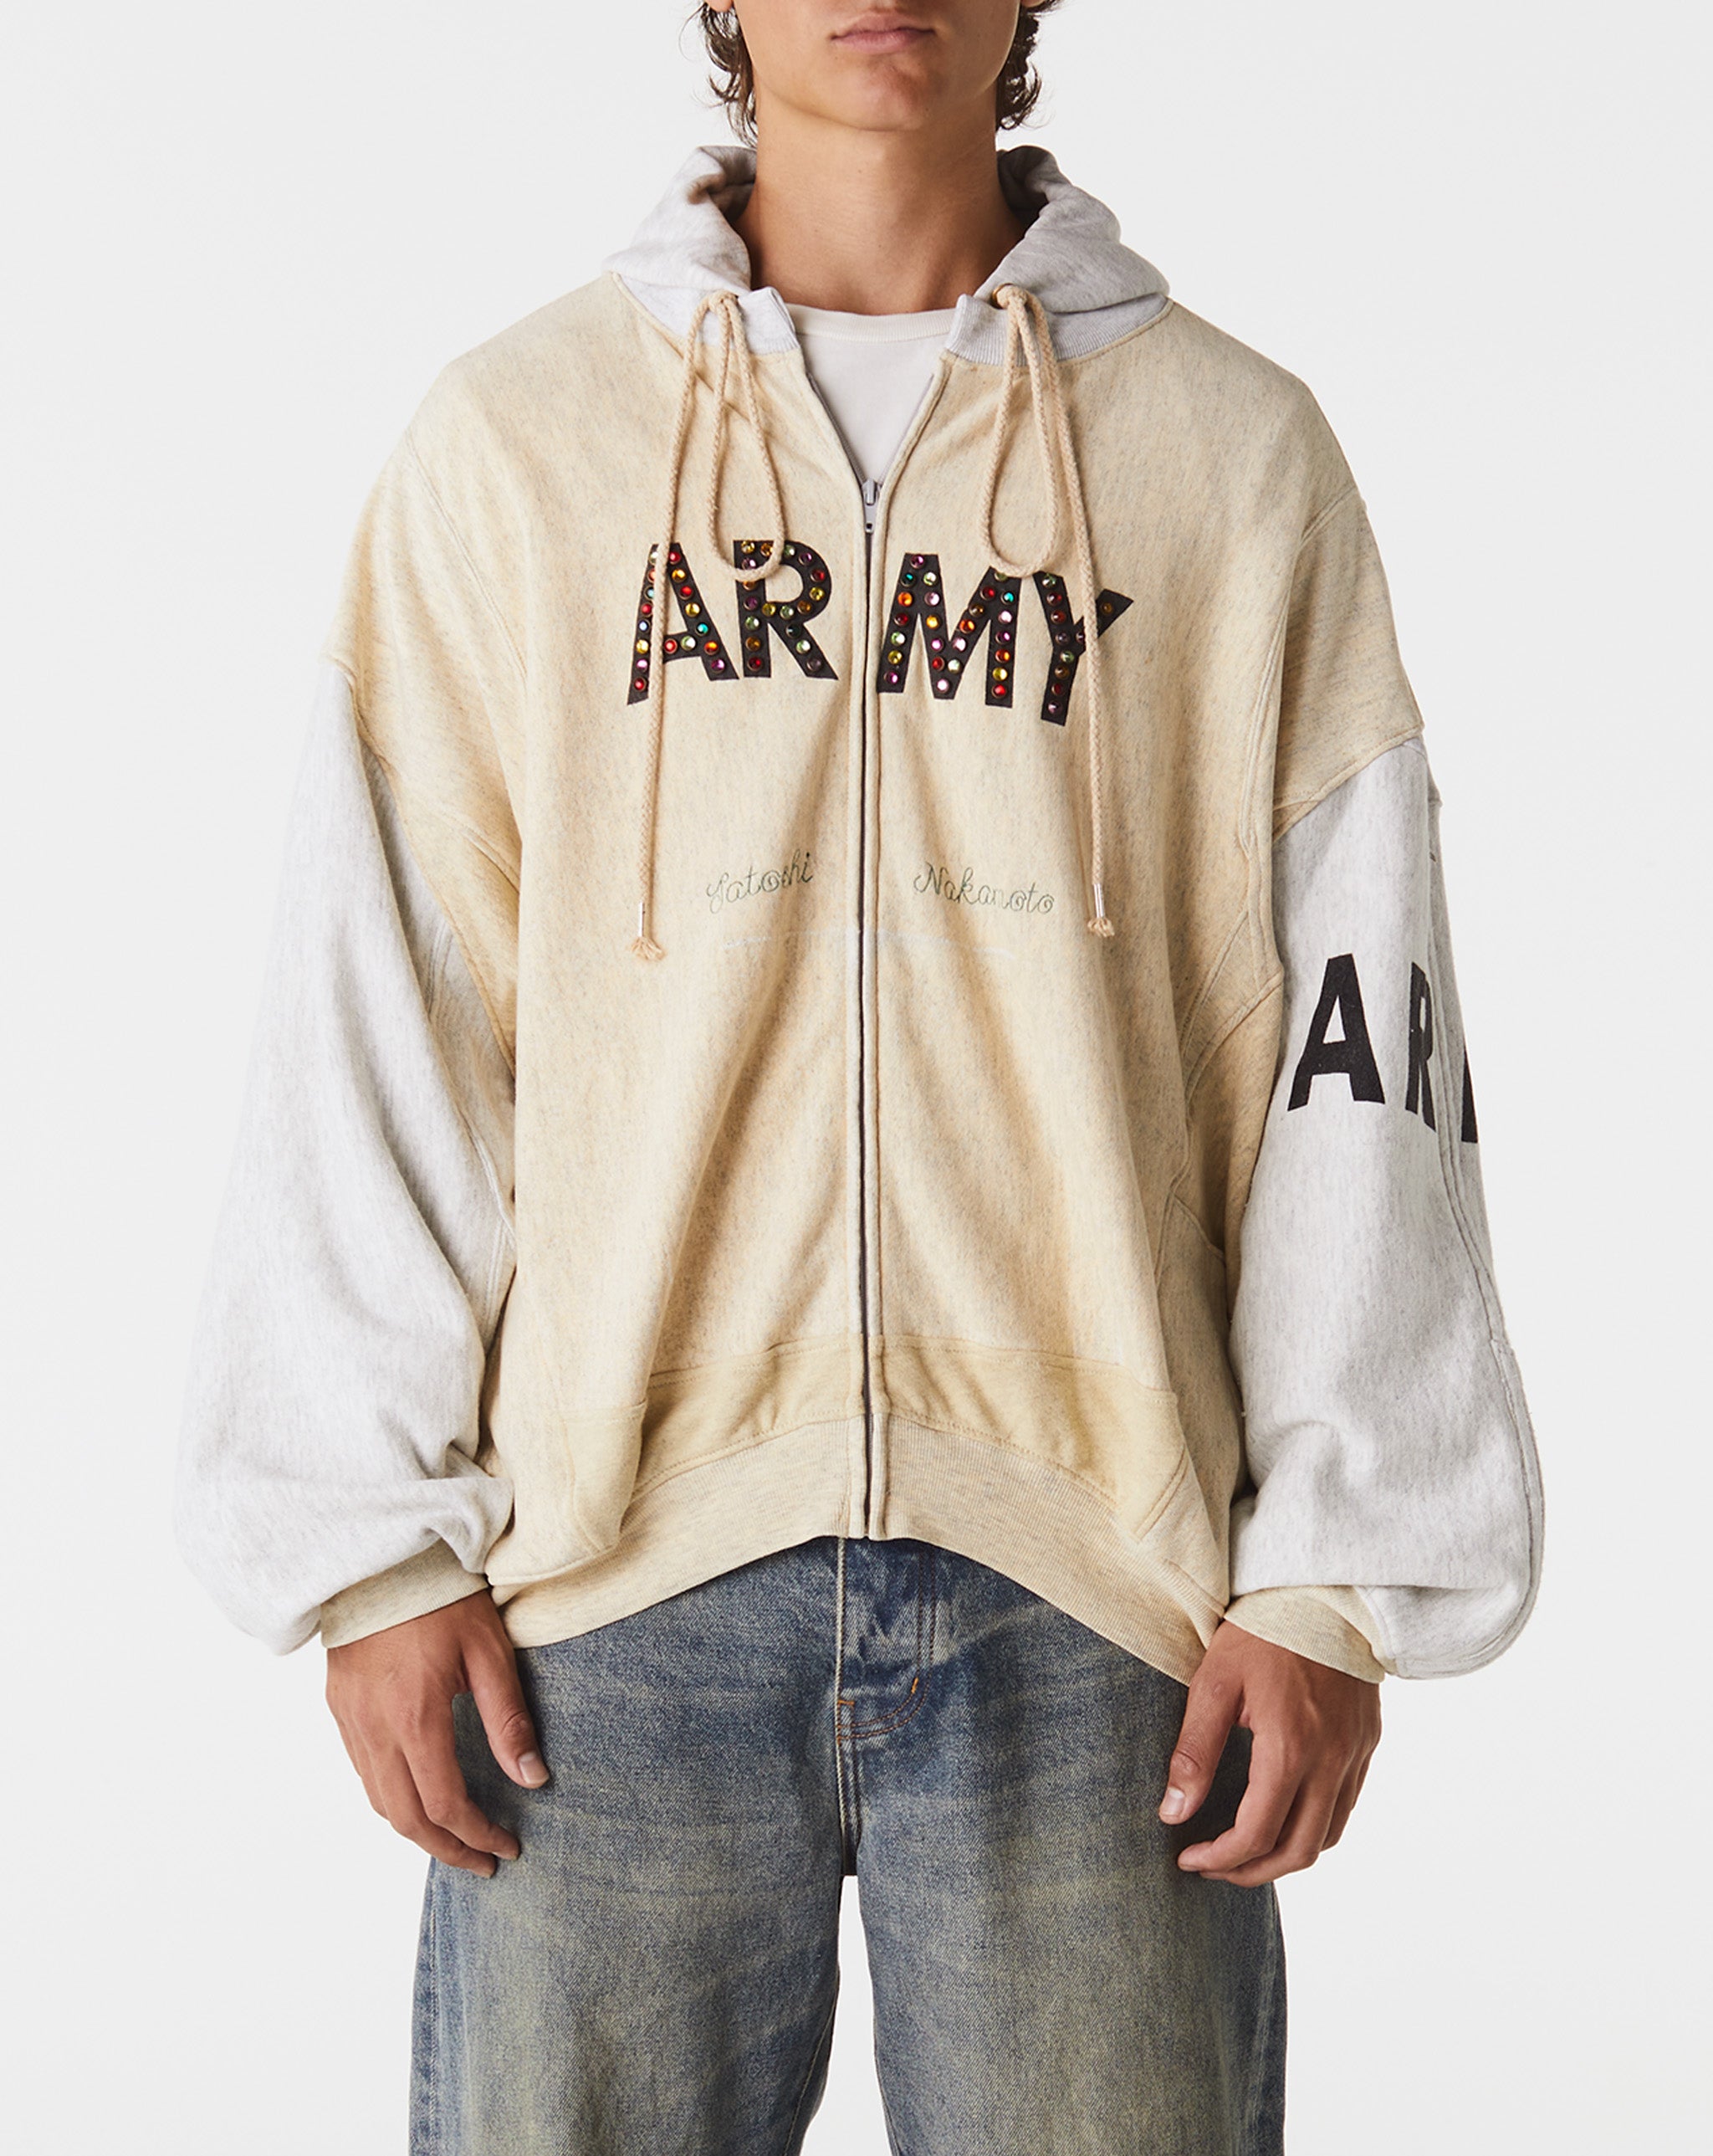 Satoshi Nakamoto Other Scenes Army Hoodie  - Cheap 127-0 Jordan outlet